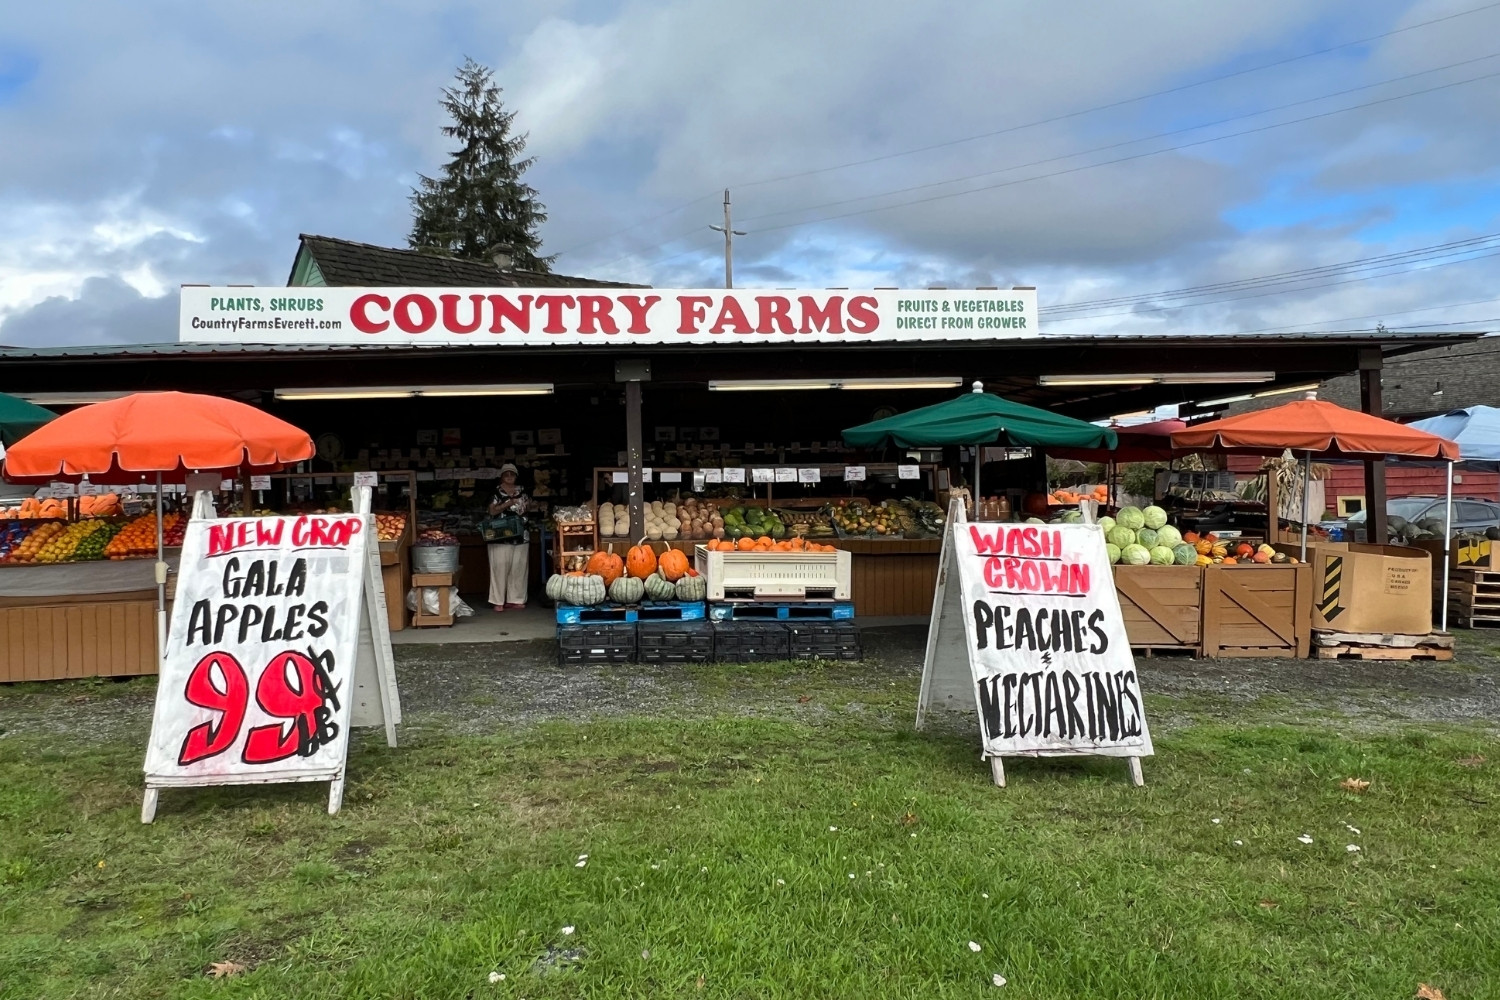 Front view of a local fruit and vegetable stand. A-frame signs advertise gala applies, peaches and nectarines. Umbrellas in orange and green shield fruit displays